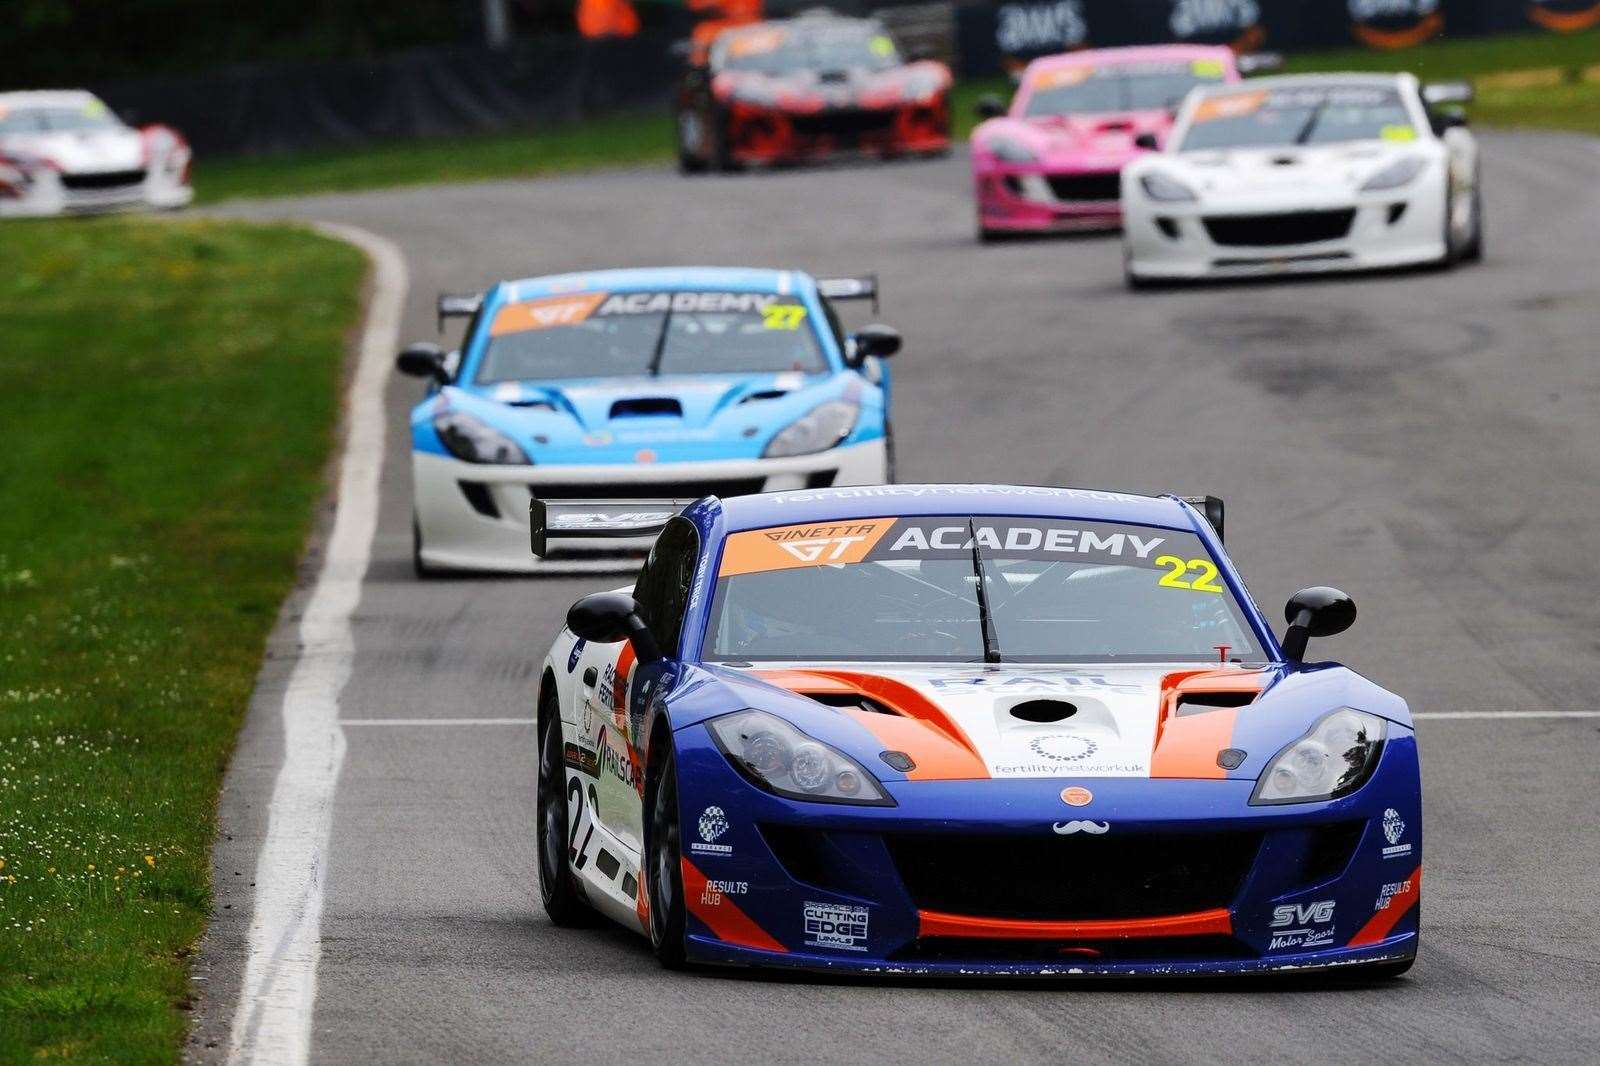 Toby Trice making his debut in his purple and orange Railscape Ginetta Picture: Jakob Ebrey